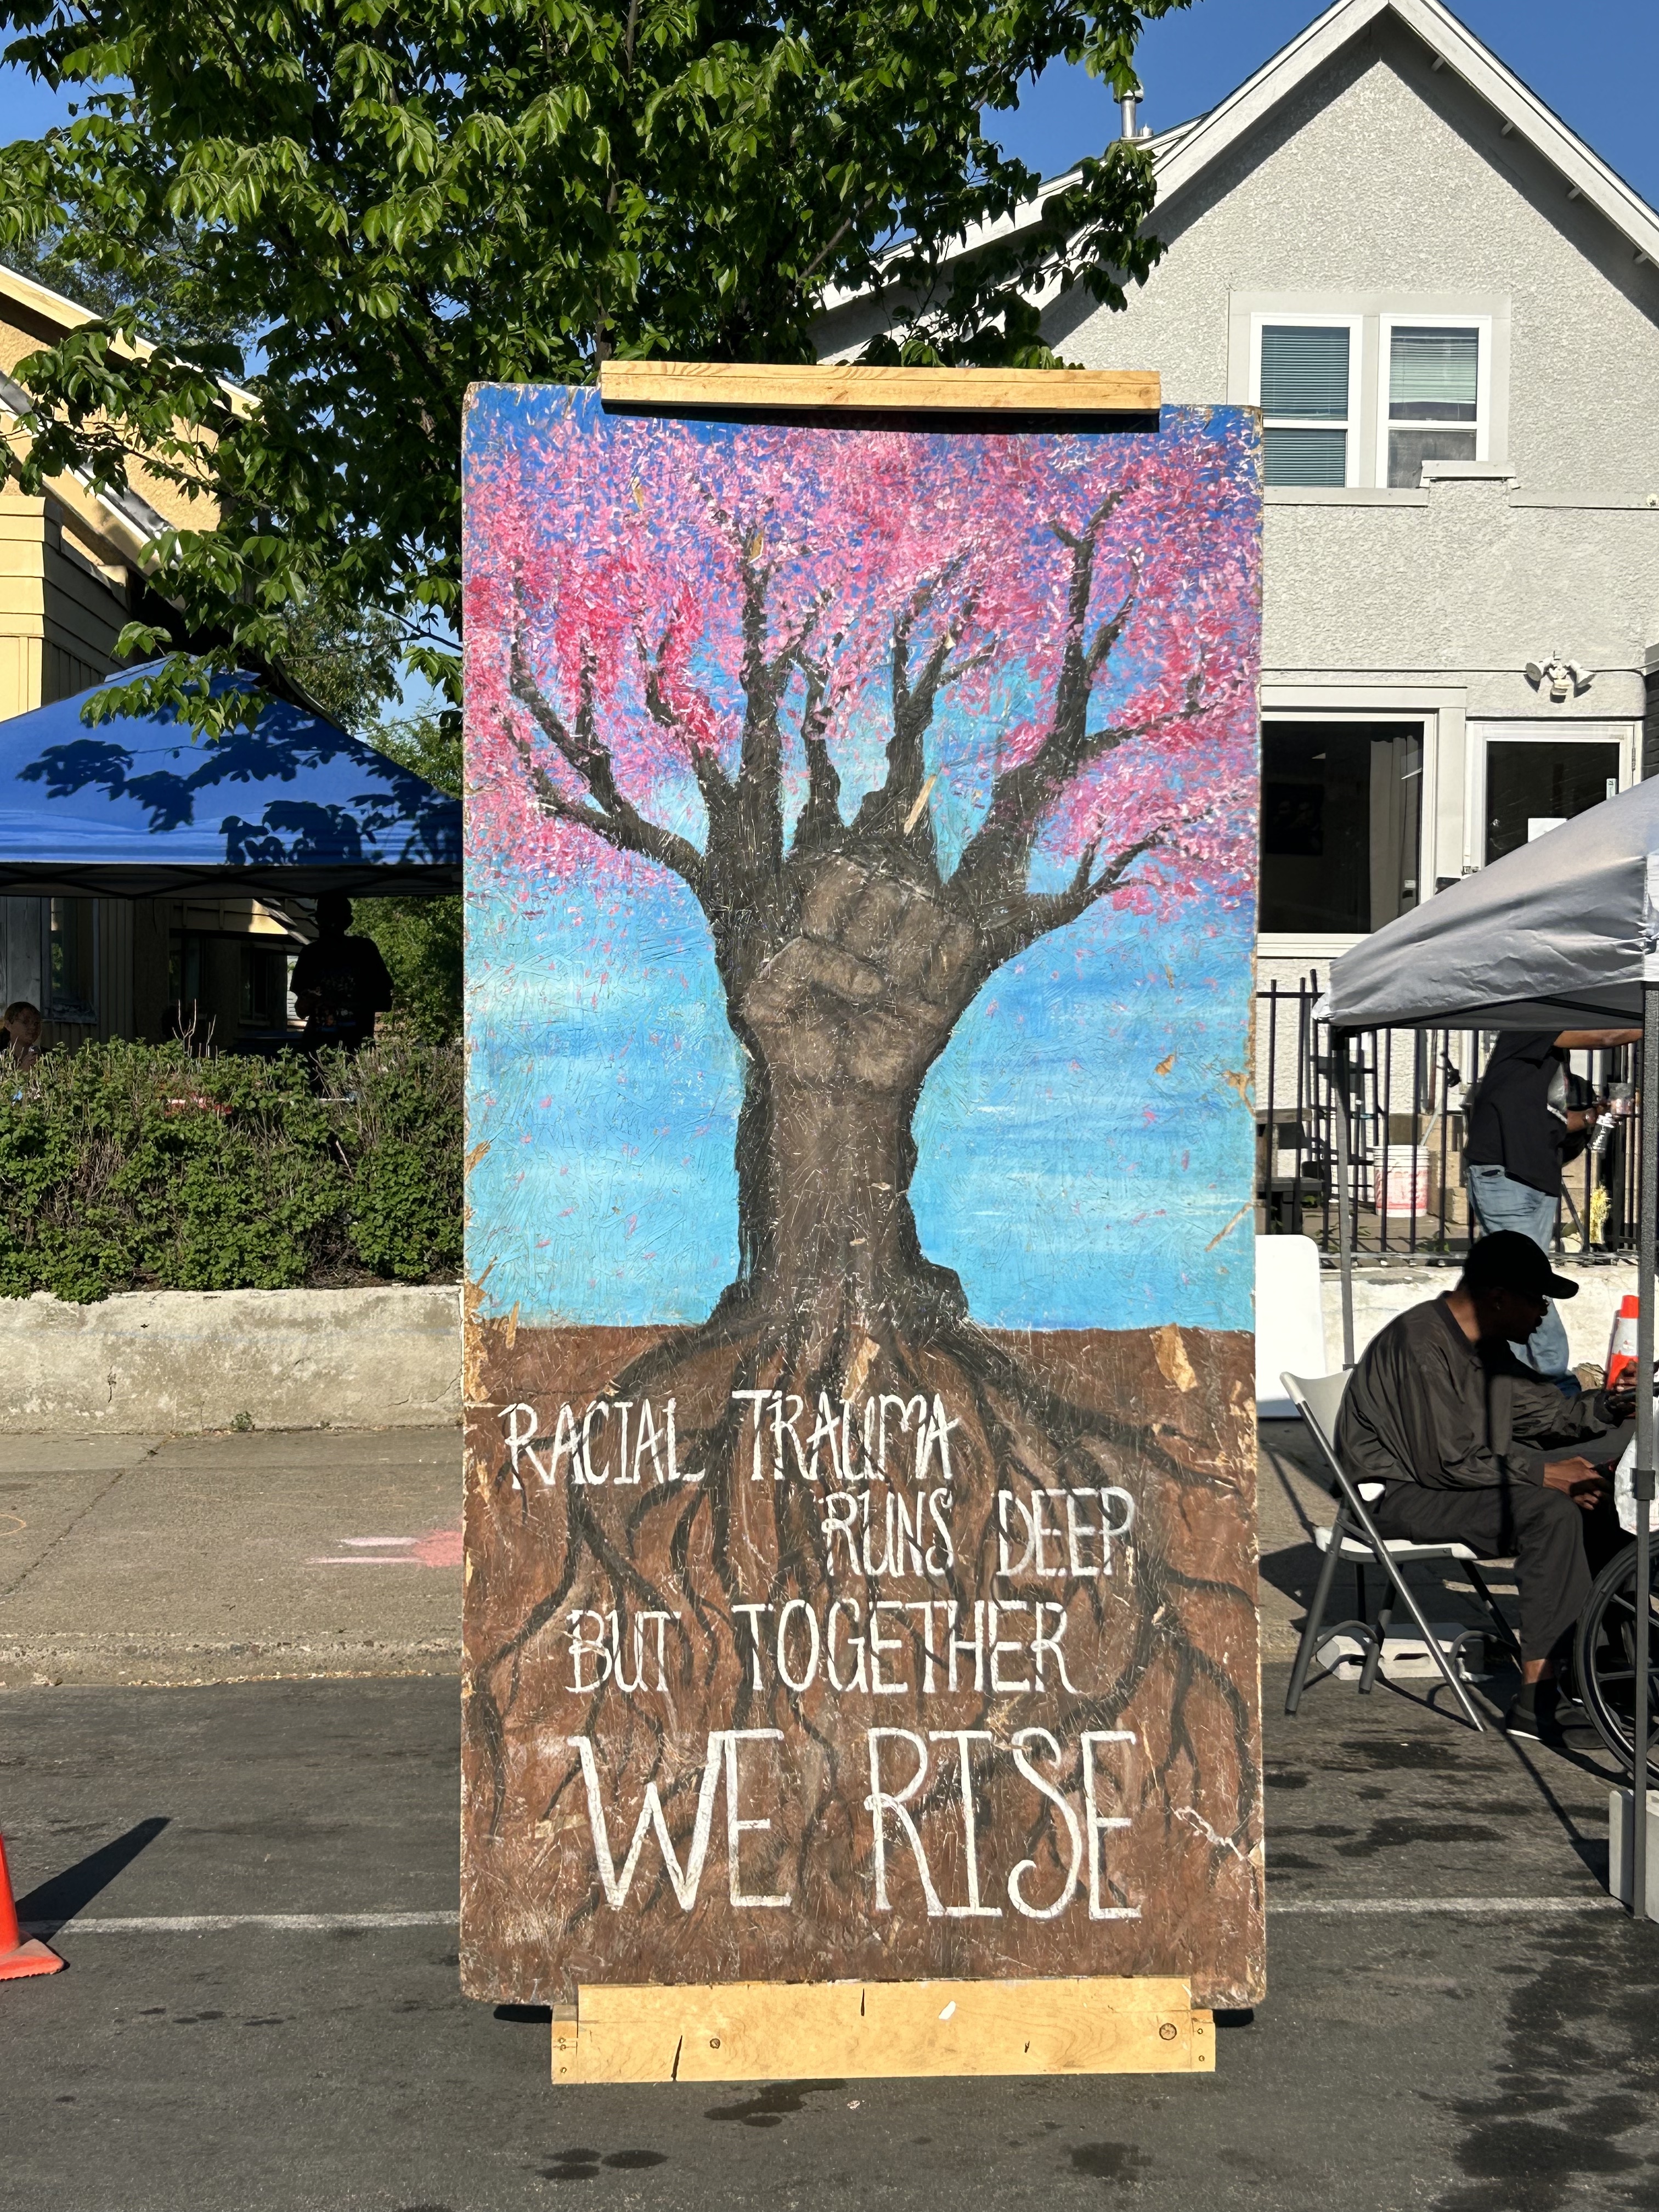 Art depicting a hardwood tree and a fist intertwined. It reads: "Racial trauma runs deep, but together we rise"